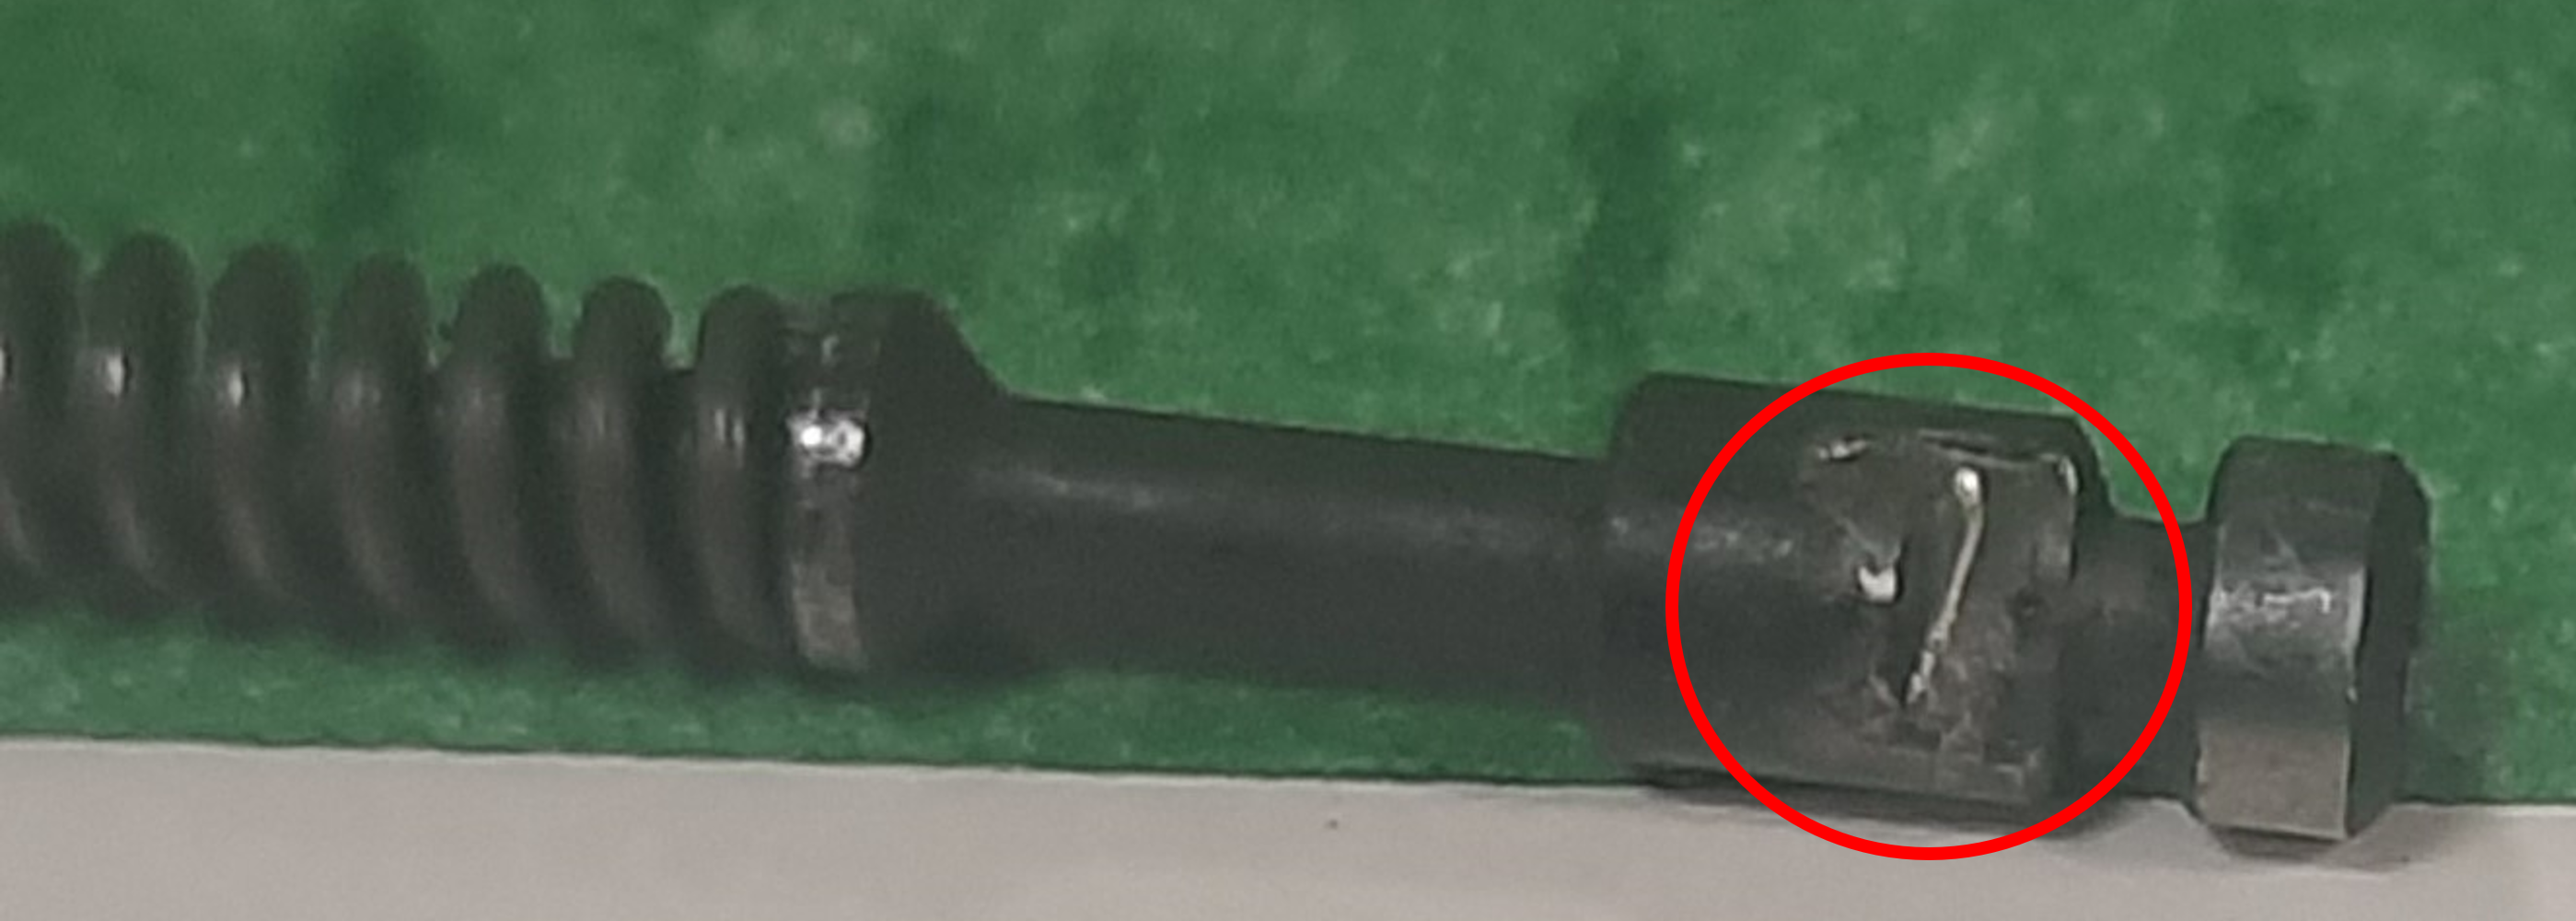 Damaged extractor tension pin